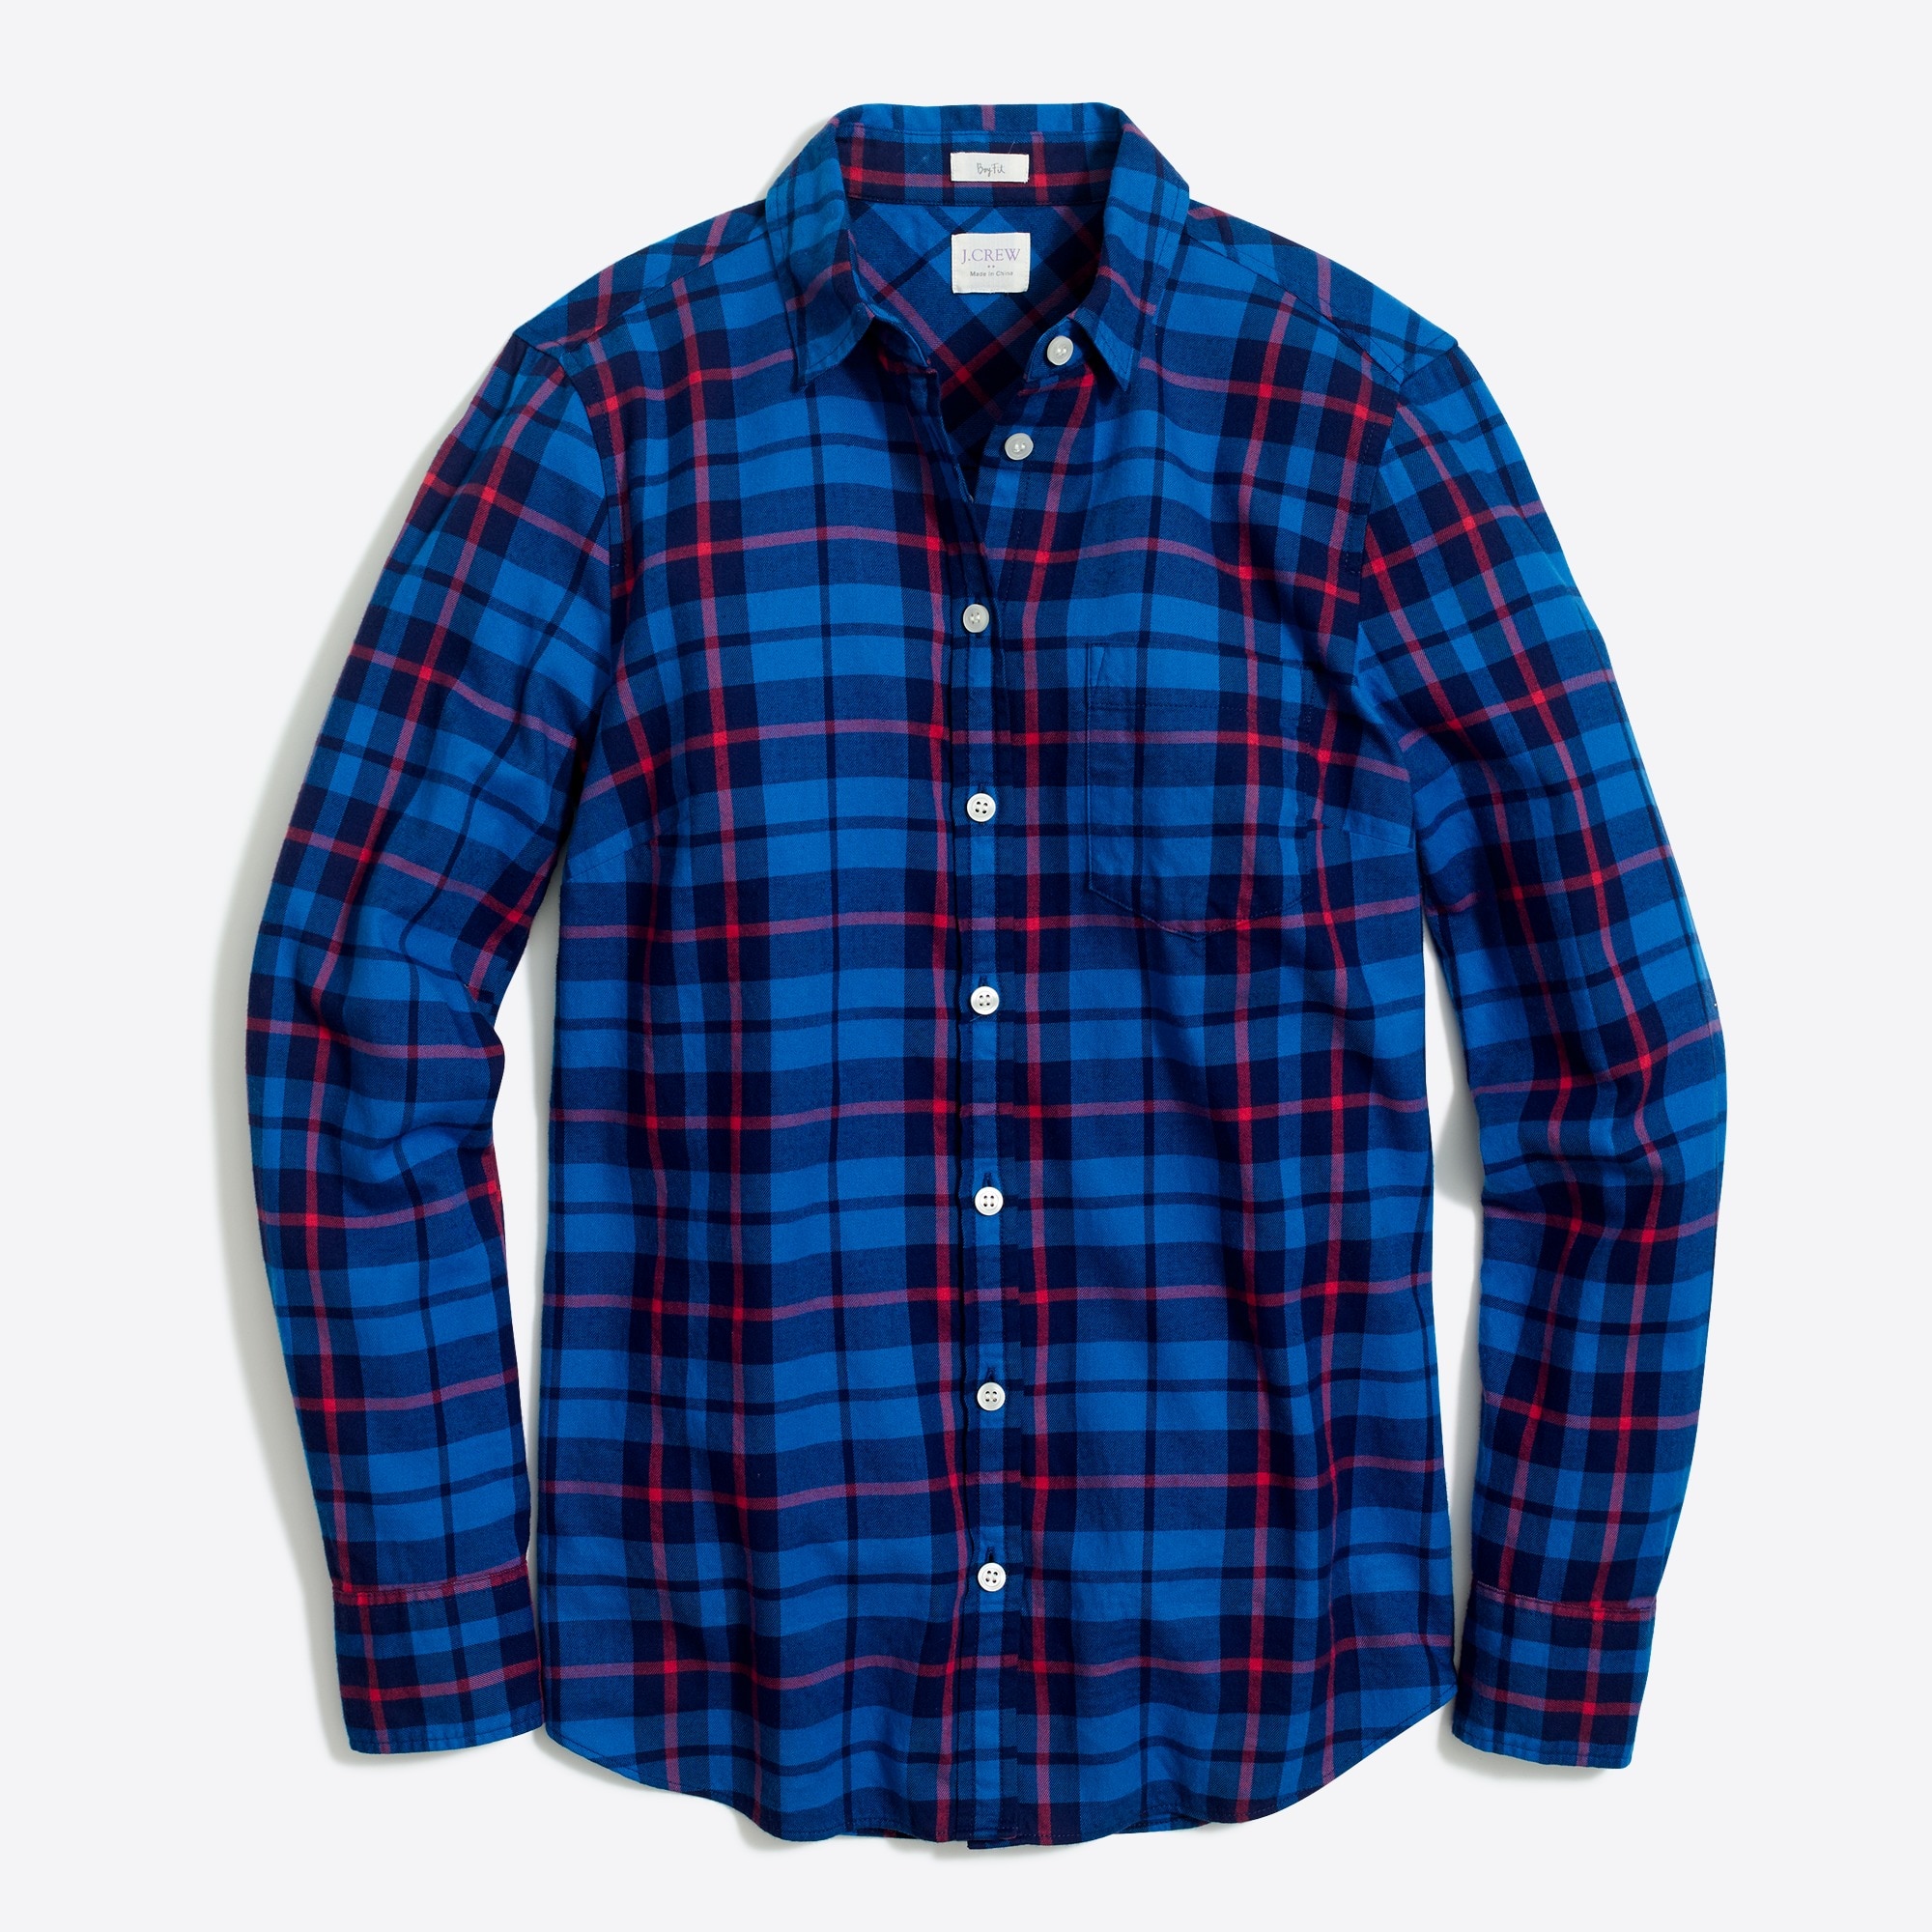 Wear the flannel shirt with
different  styles to look trendy